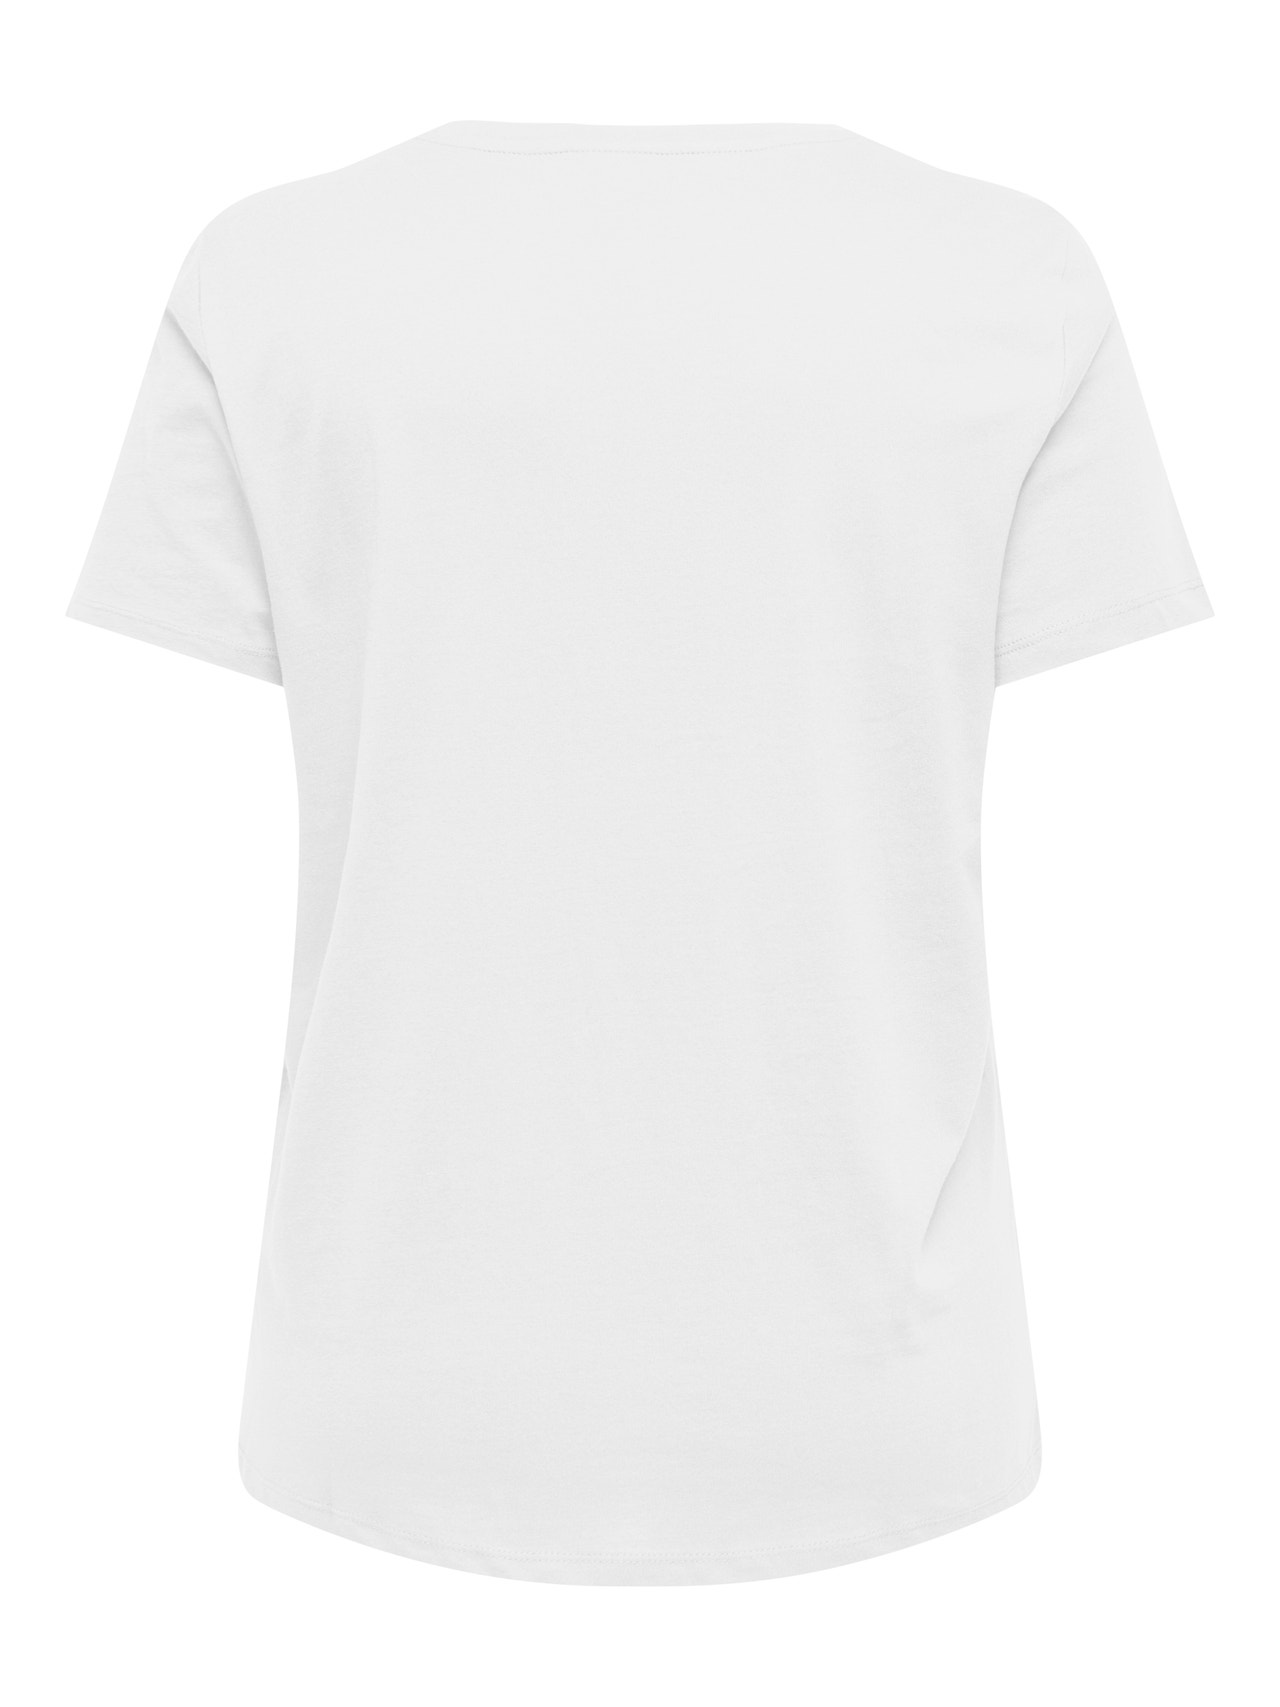 ONLY Curvy printed t-shirt -White - 15306518